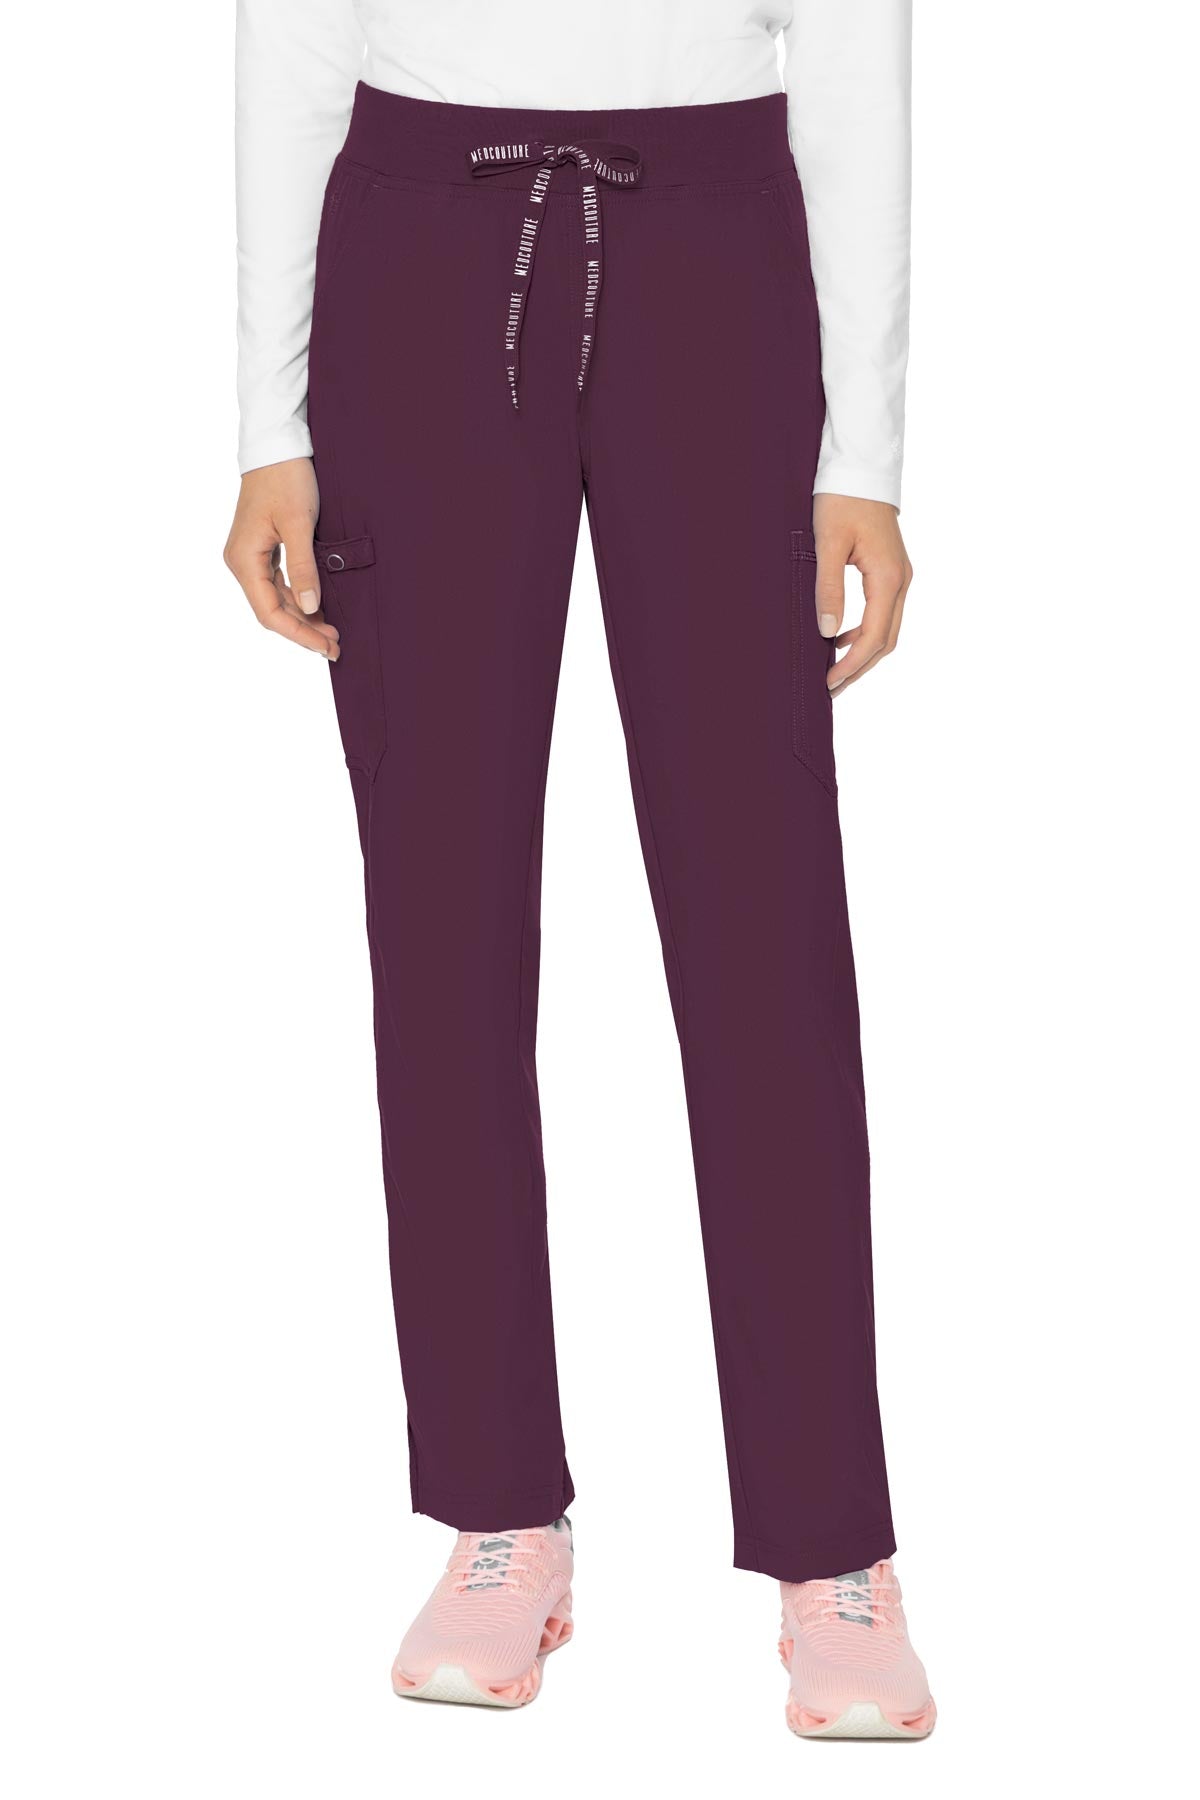 Med Couture Scrub Pants Touch Yoga in Wine at Parker's Clothing and Shoes.